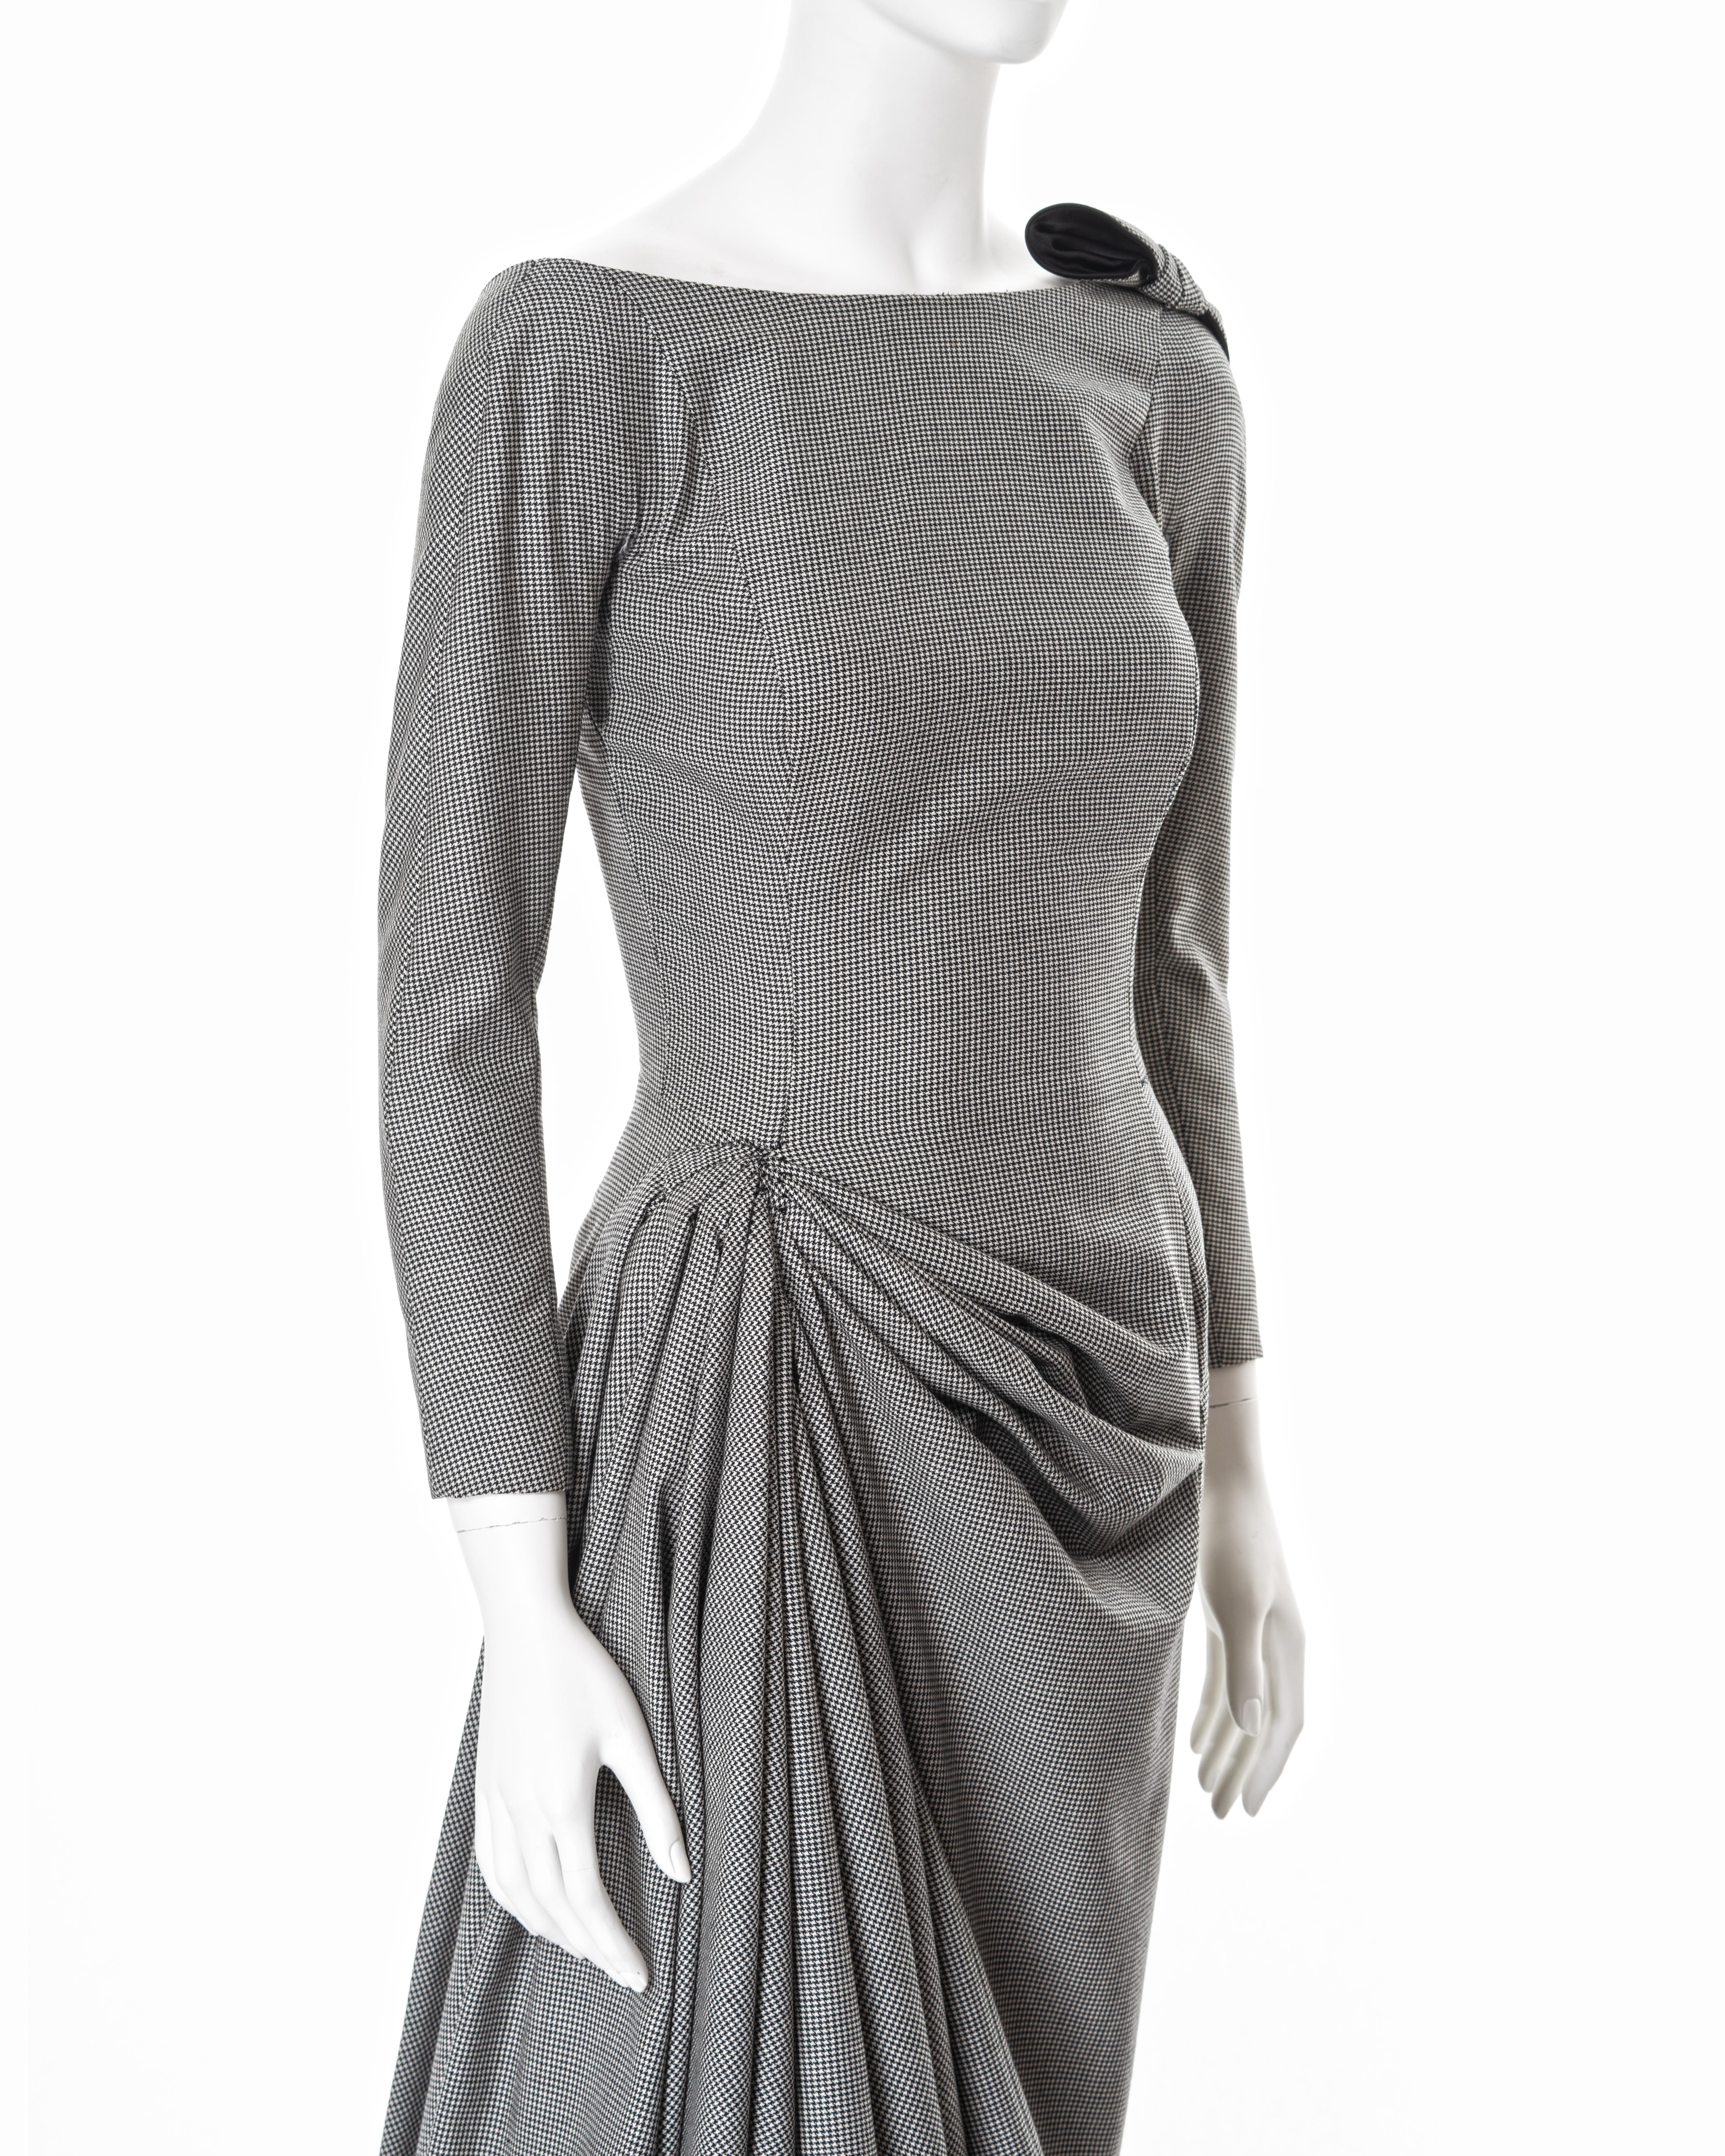 John Galliano draped houndstooth check wool cocktail dress, ss 1995 3